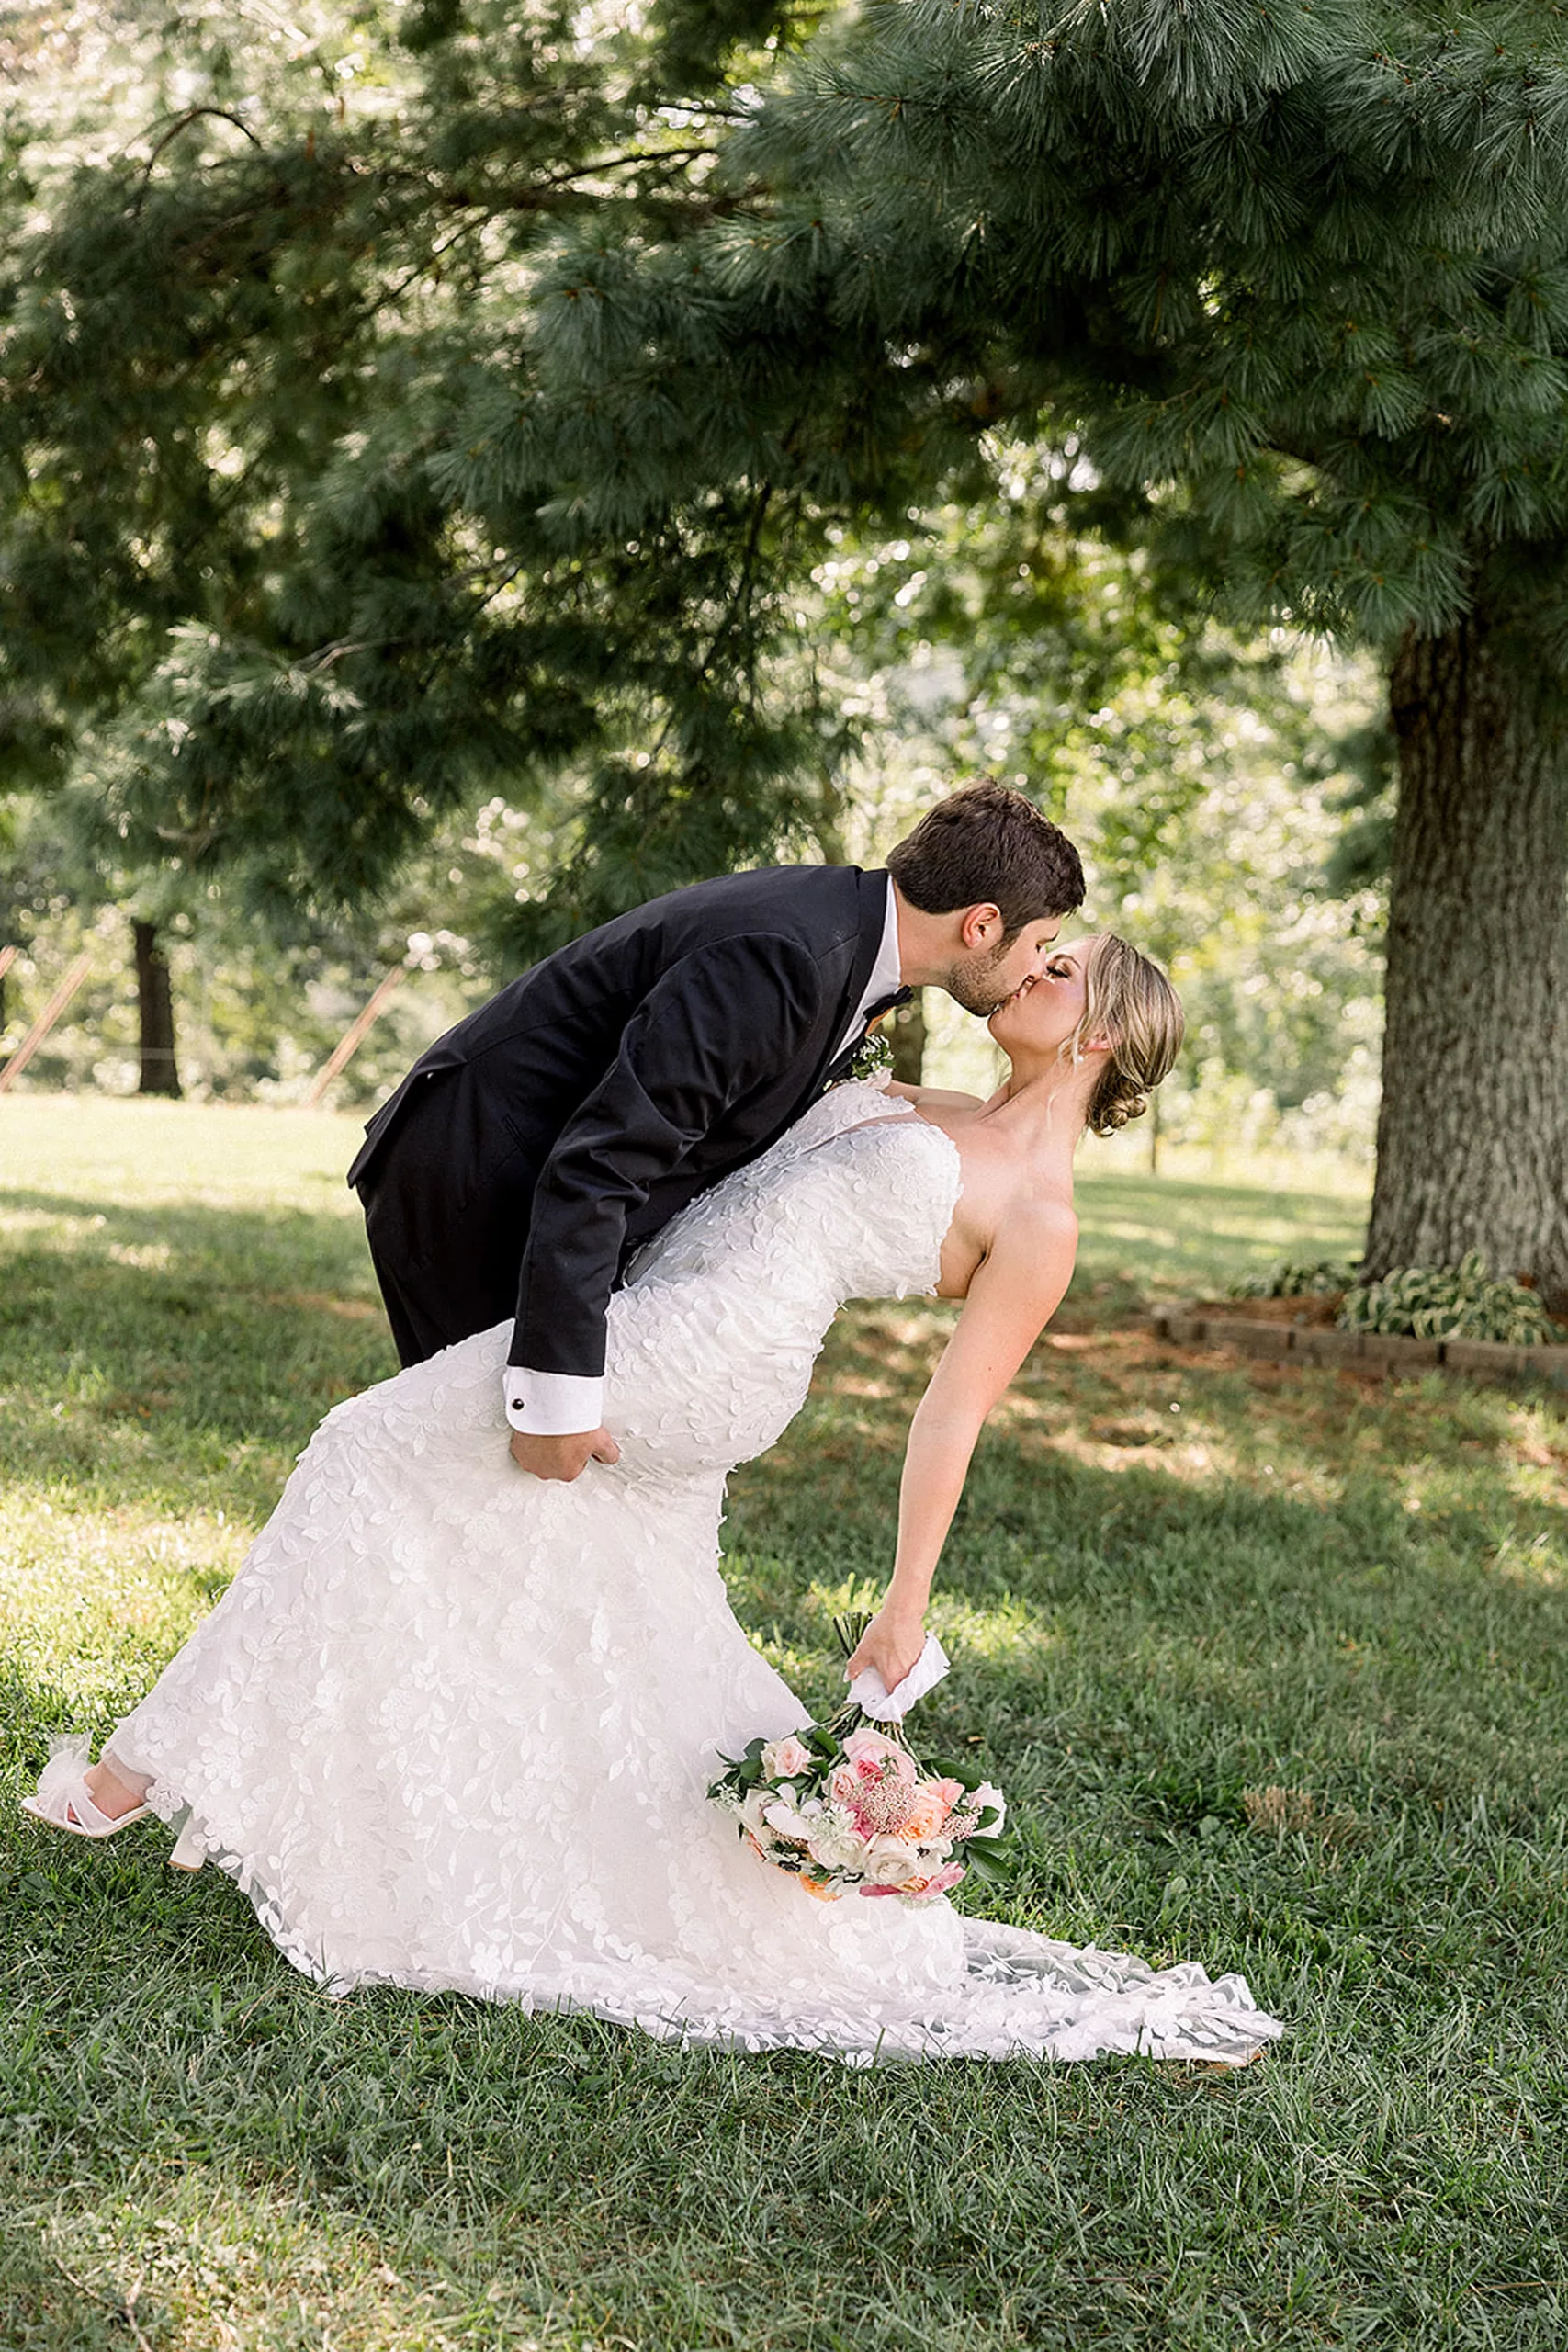 A groom in a black suit dips and kisses his bride under a pine tree